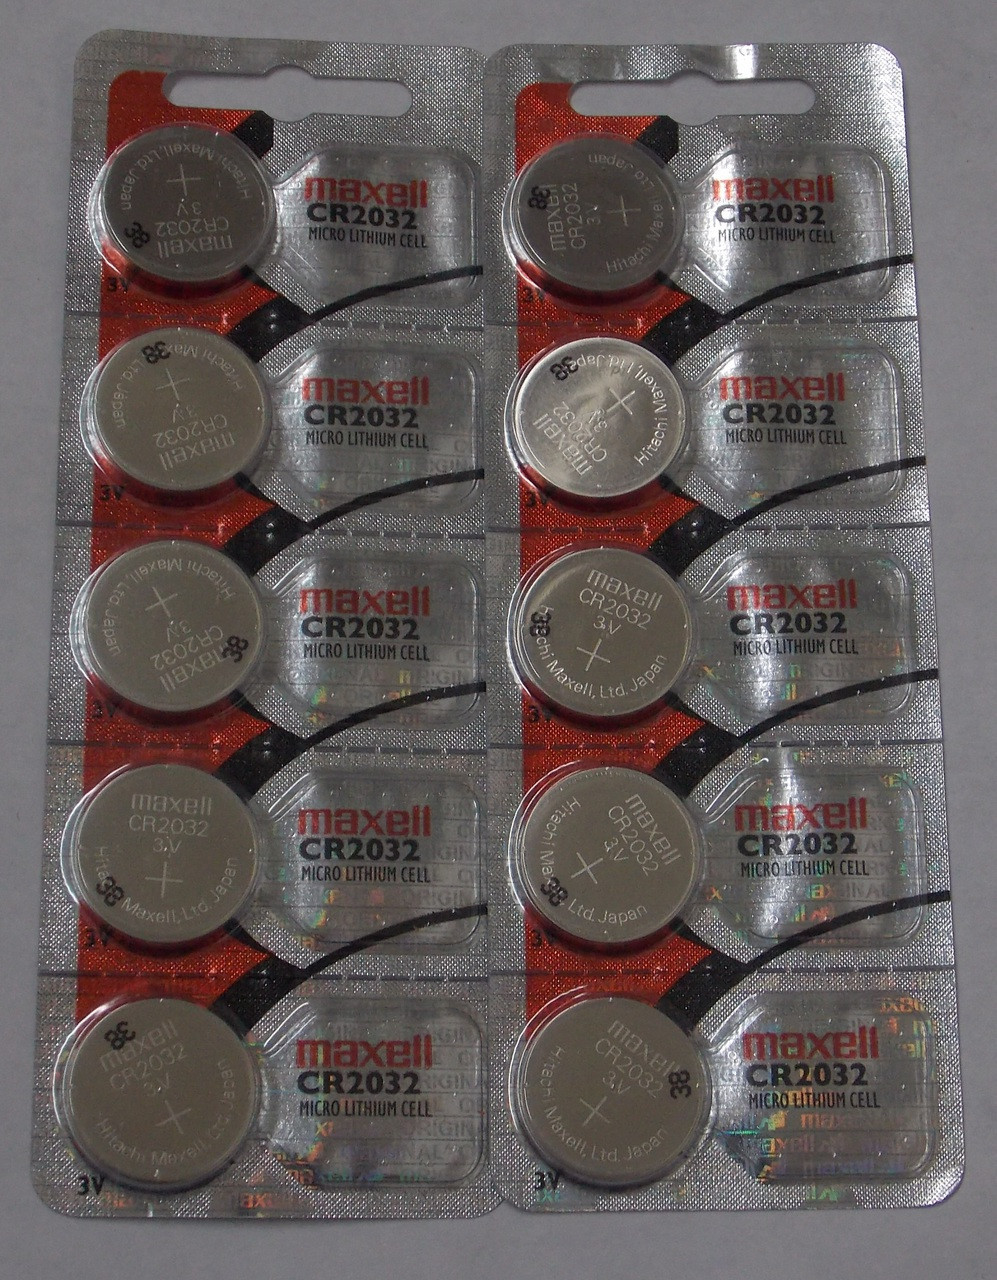 Maxell CR2032 3V Lithium Coin Cell Battery, Battery Capacity